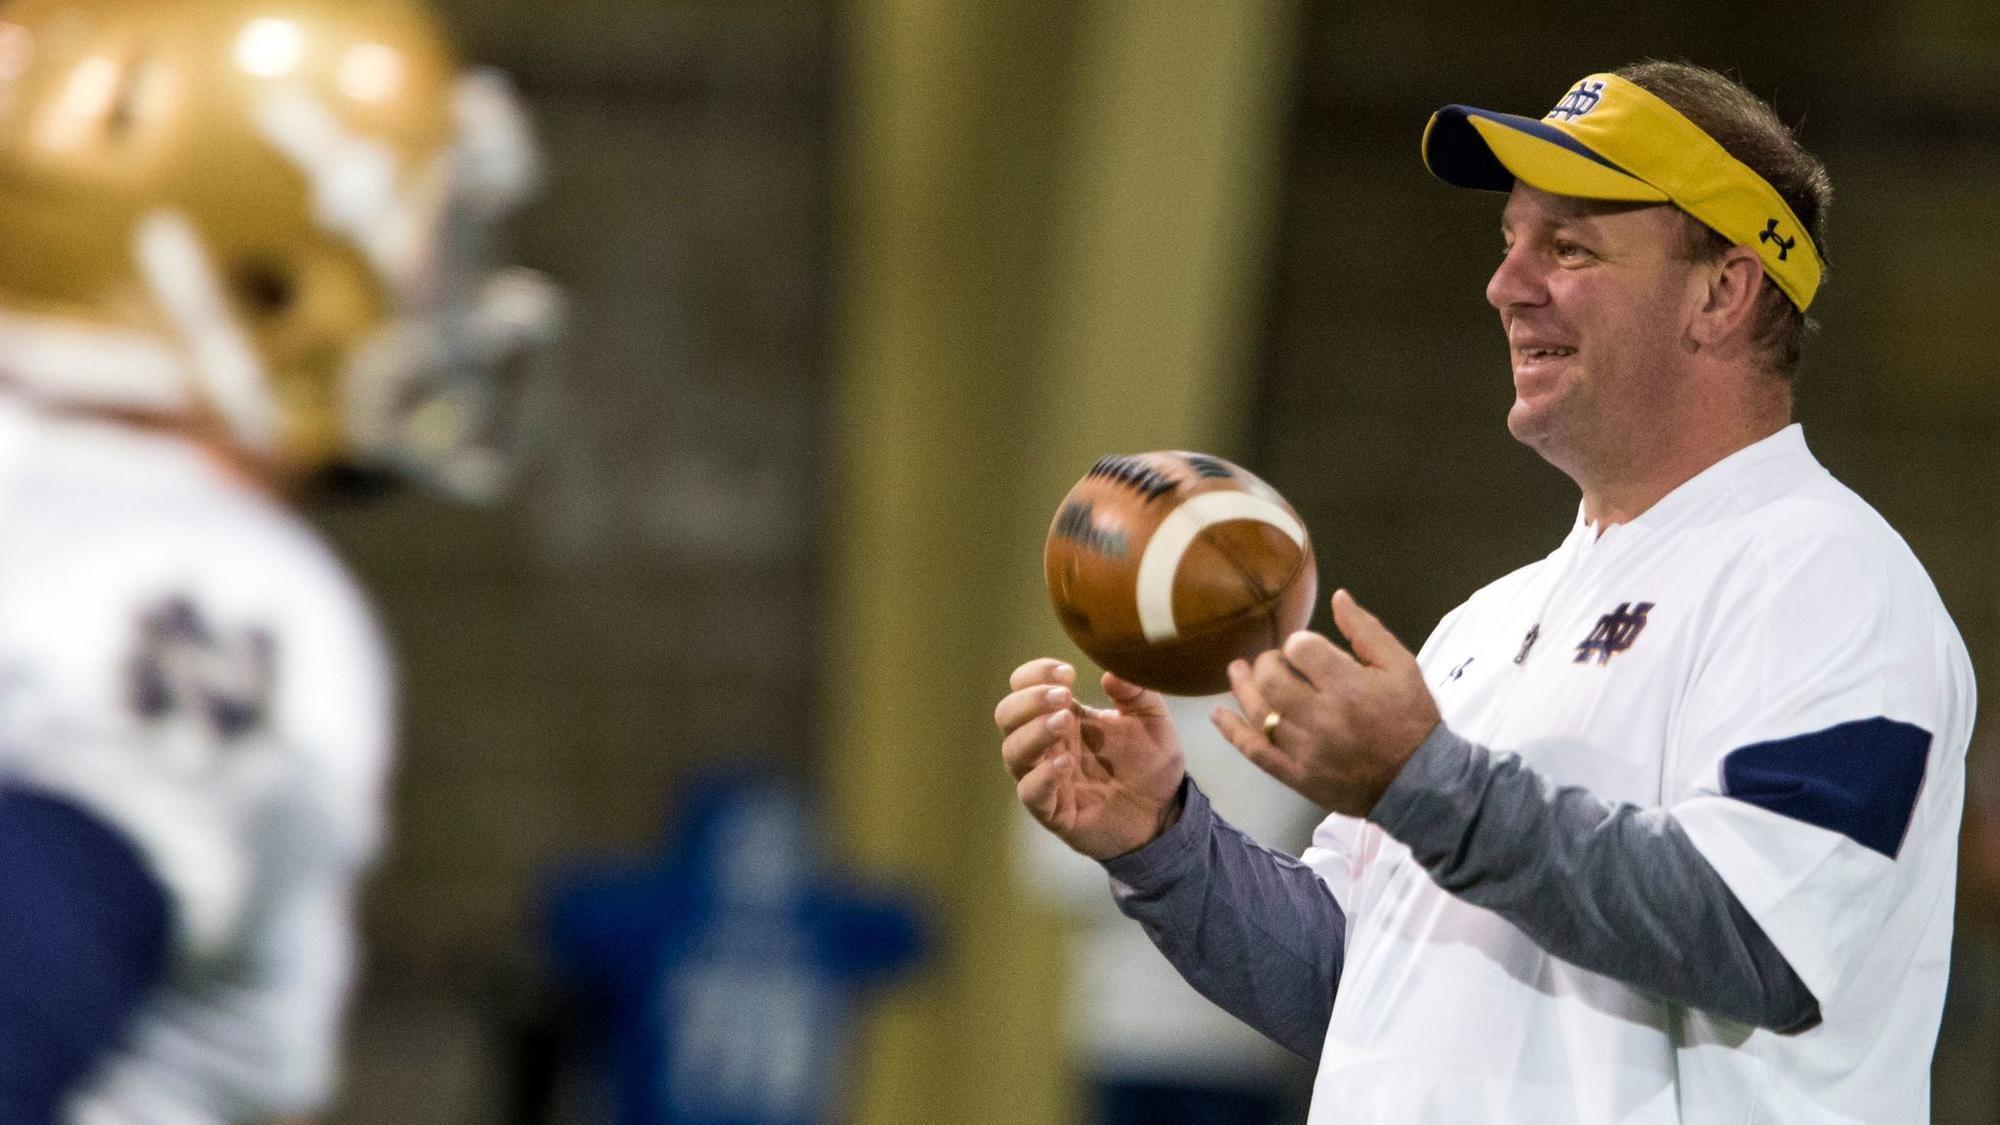 Notre Dame loses defensive coordinator Mike Elko to Texas A&M